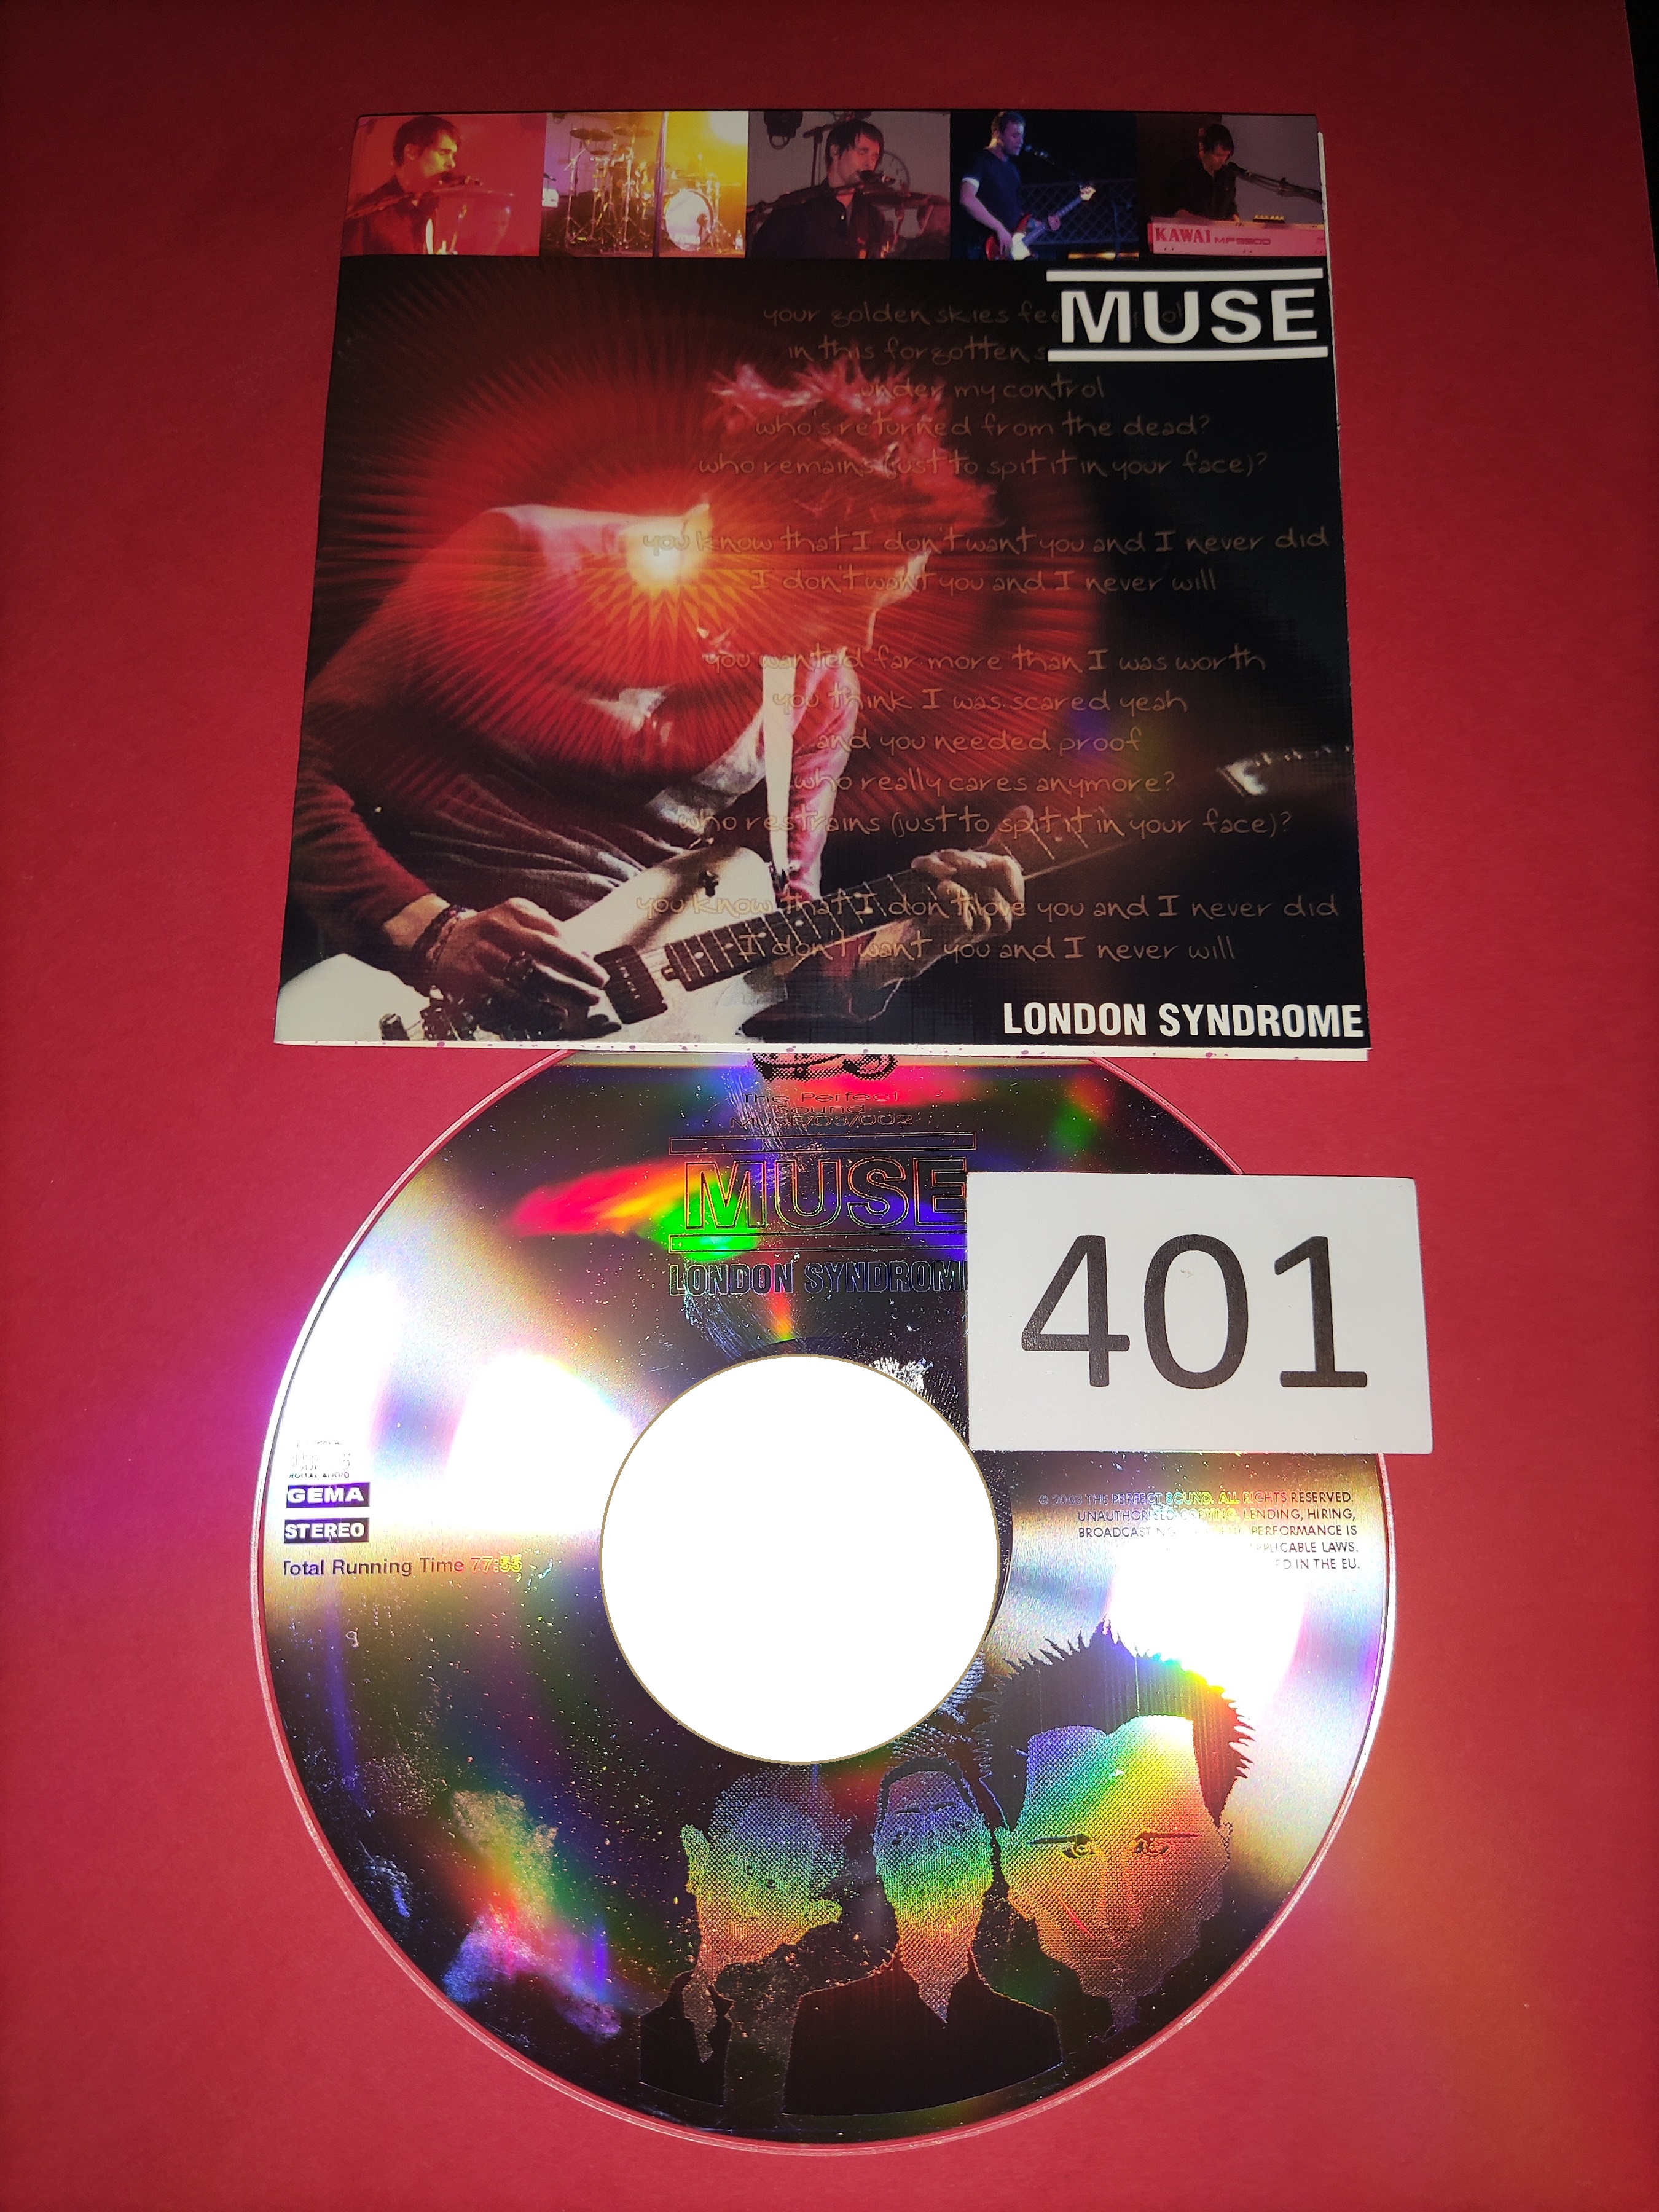 Muse-London Syndrome-Bootleg-CD-FLAC-2003-401